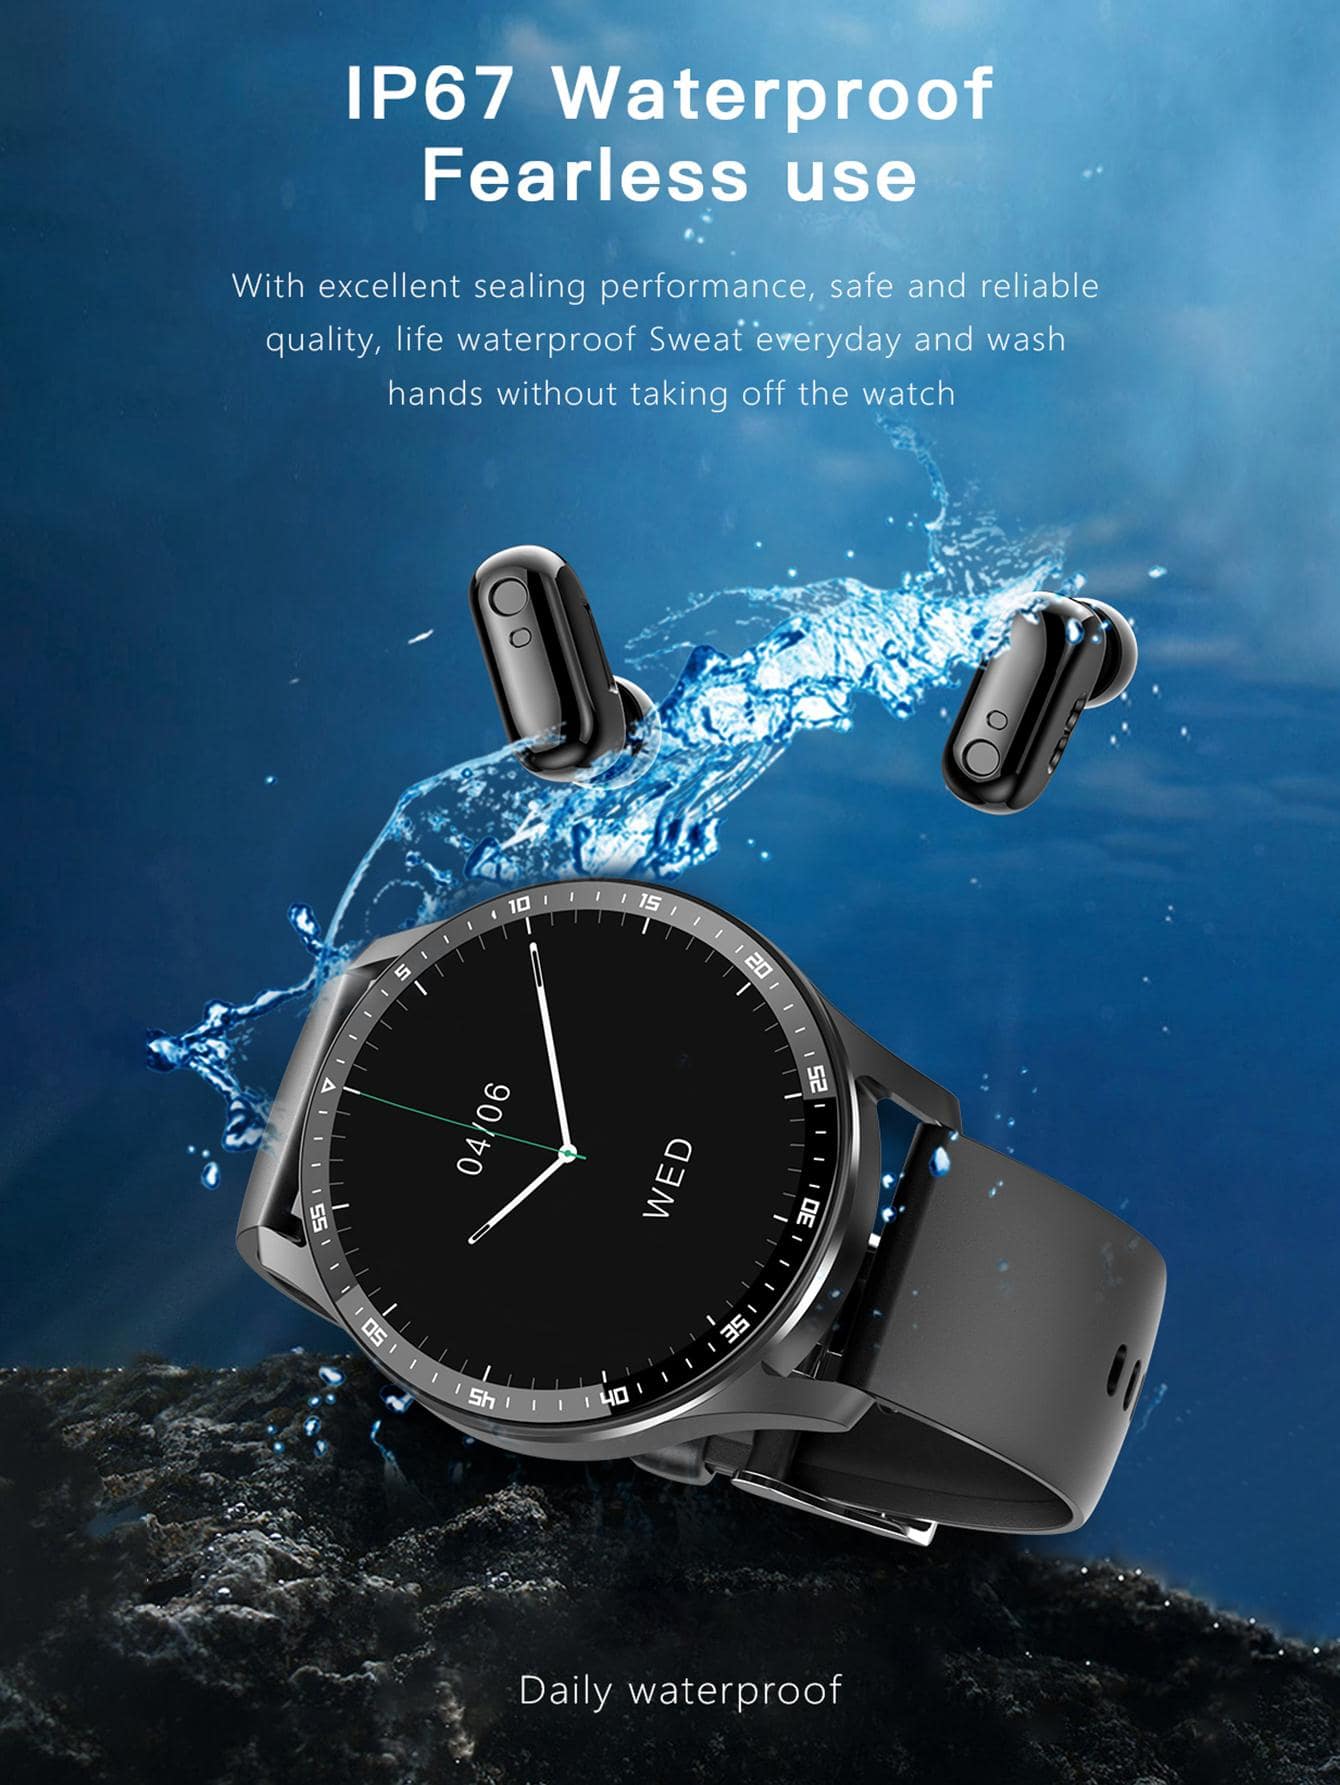 1pc Black Silicone Strap Sporty Heart Rate Monitoring And Sleep Tracking Multi-function Round Dial Smart Watch, Compatible With Androids iPhone